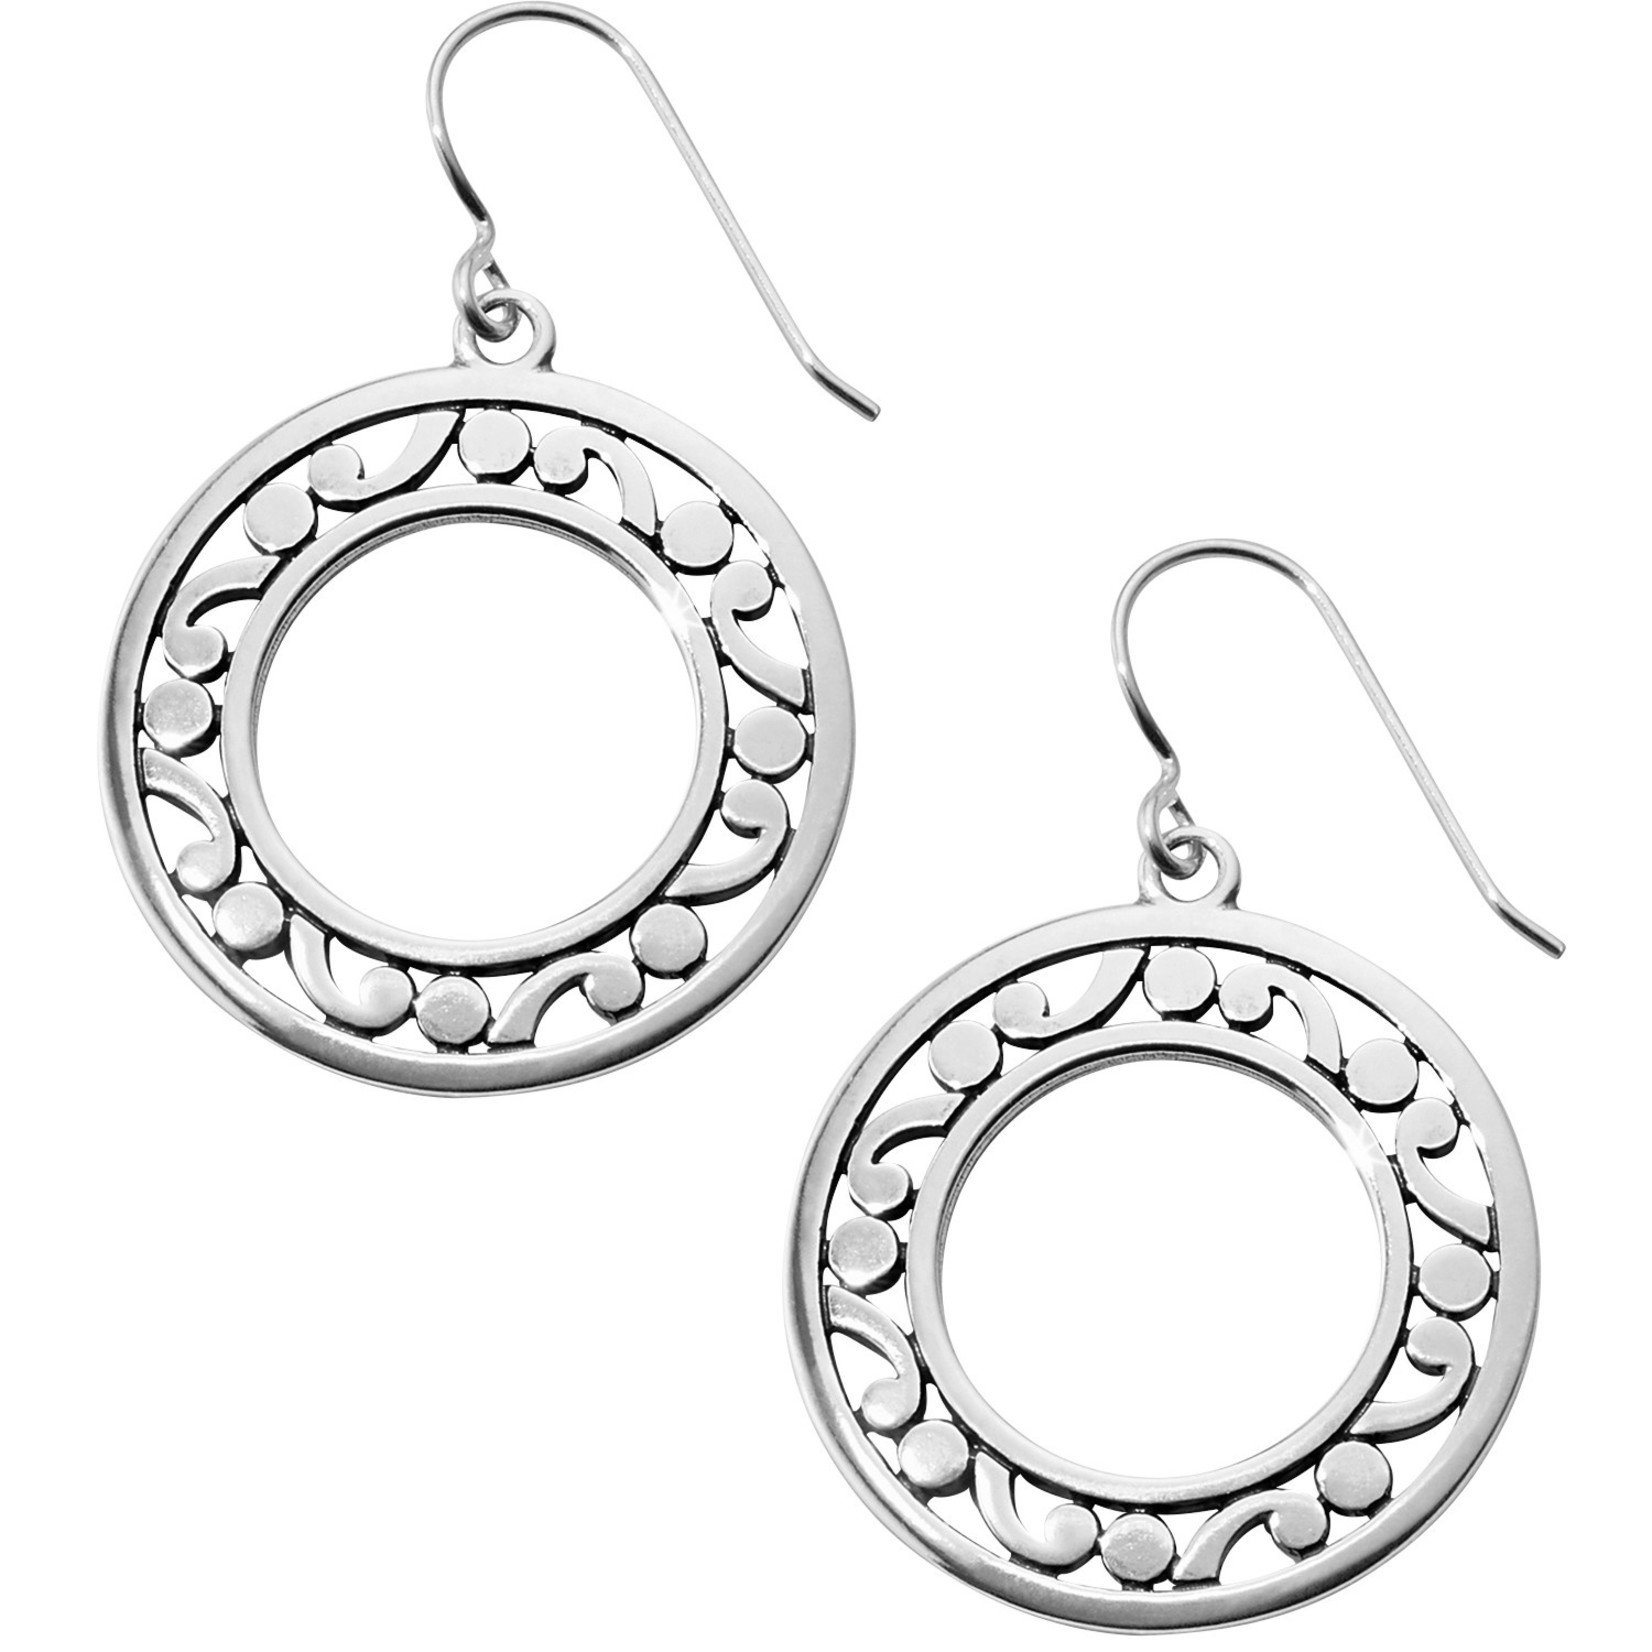 Brighton Contempo Open Ring French Wire Earrings